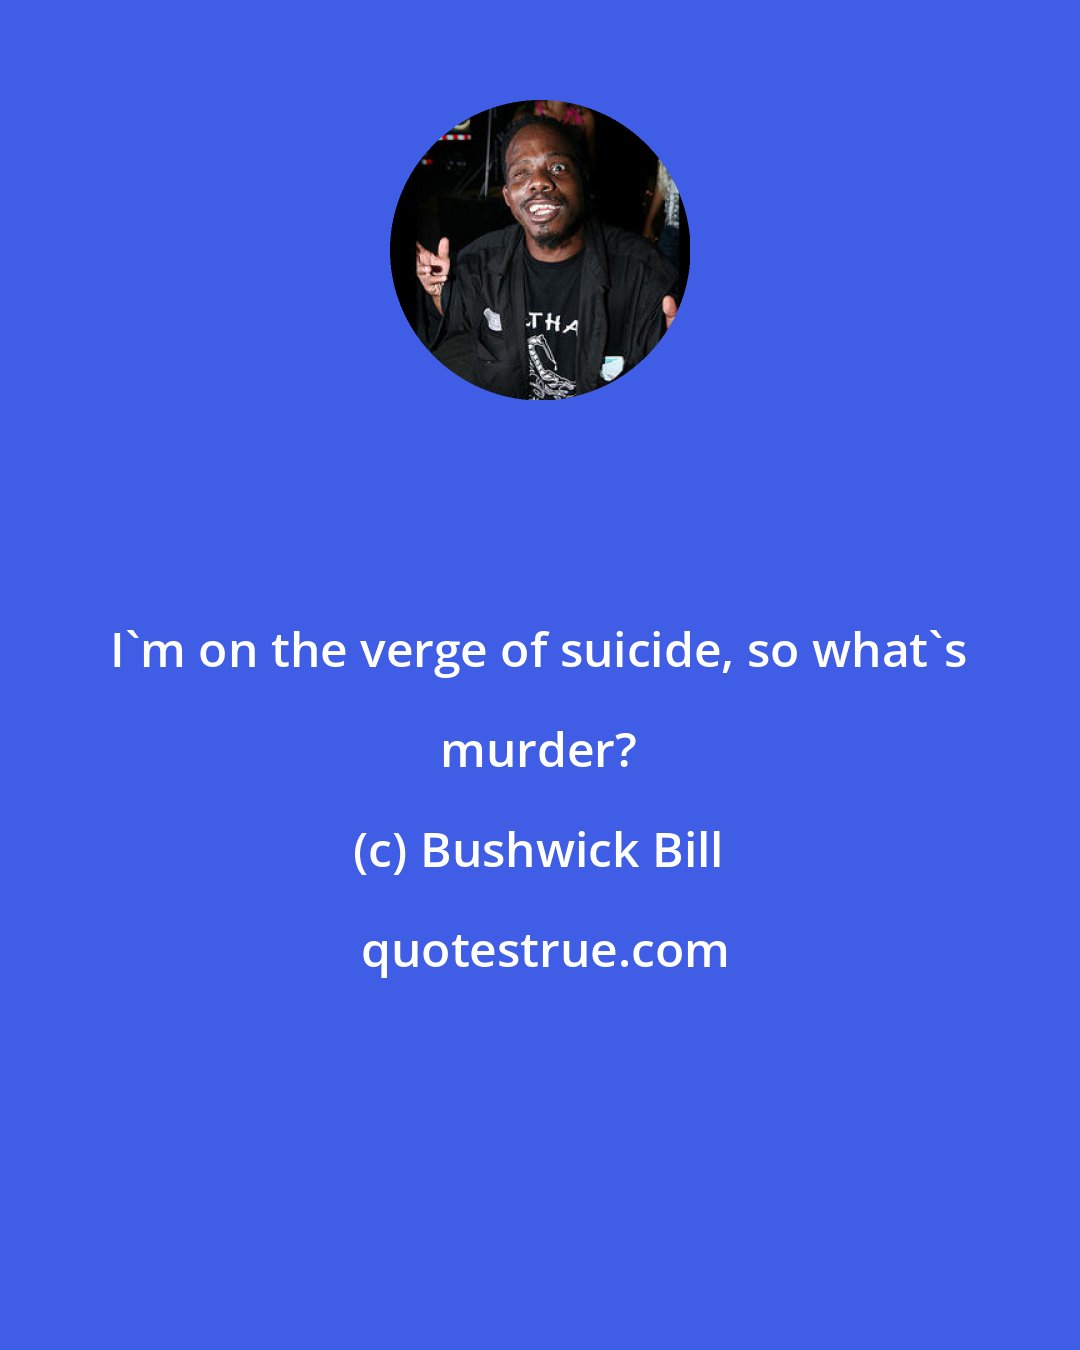 Bushwick Bill: I'm on the verge of suicide, so what's murder?